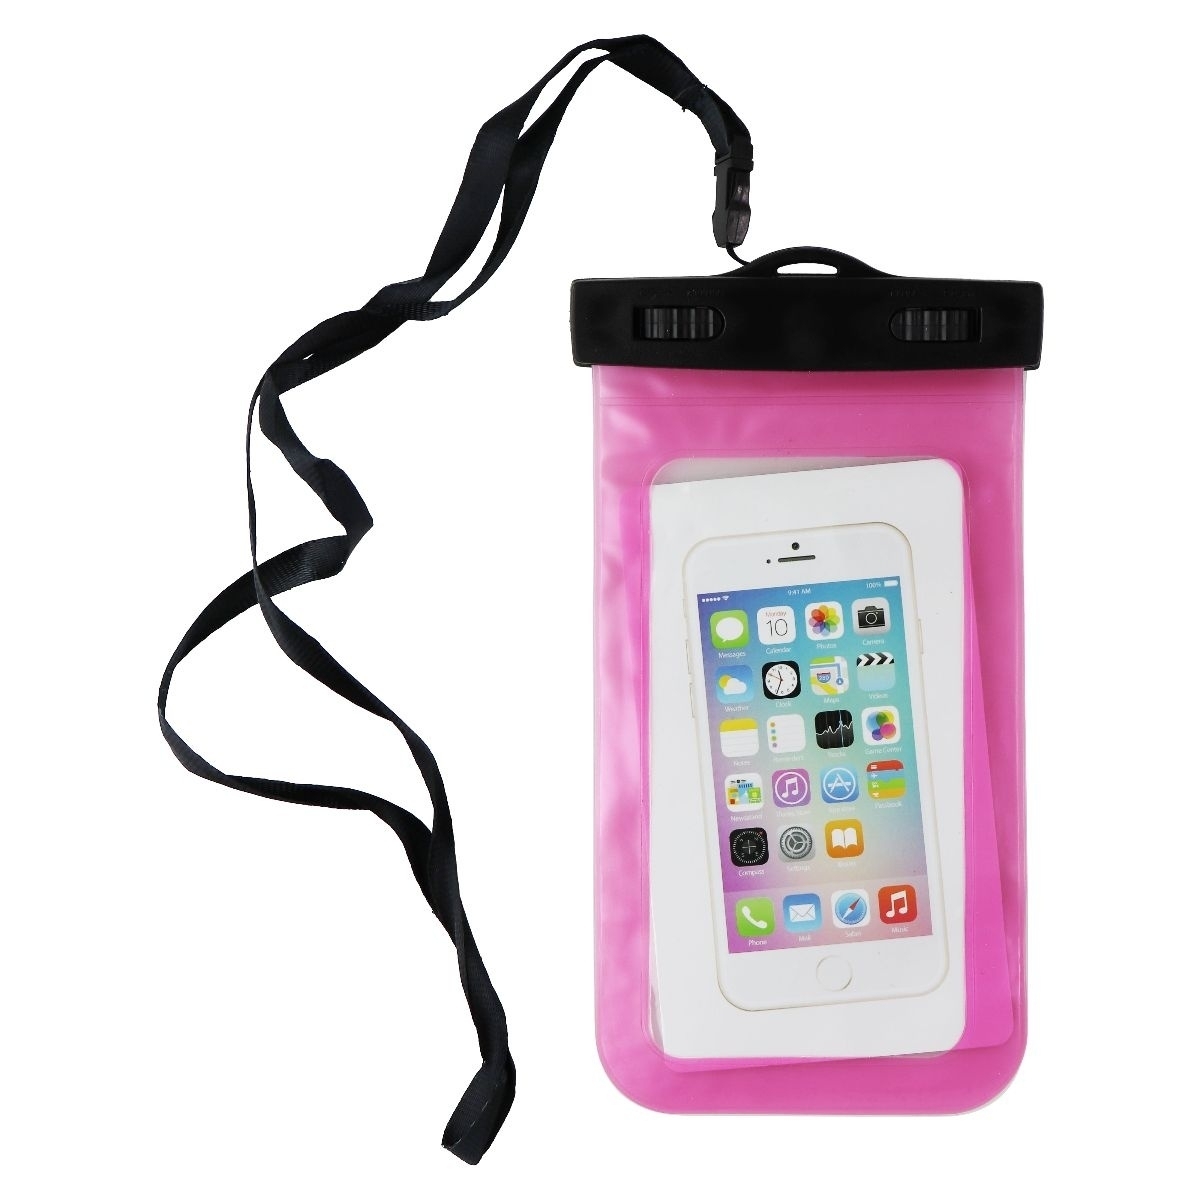 Universal Water Resistant Pouch For Smartphones With Carrying Cord - Pink